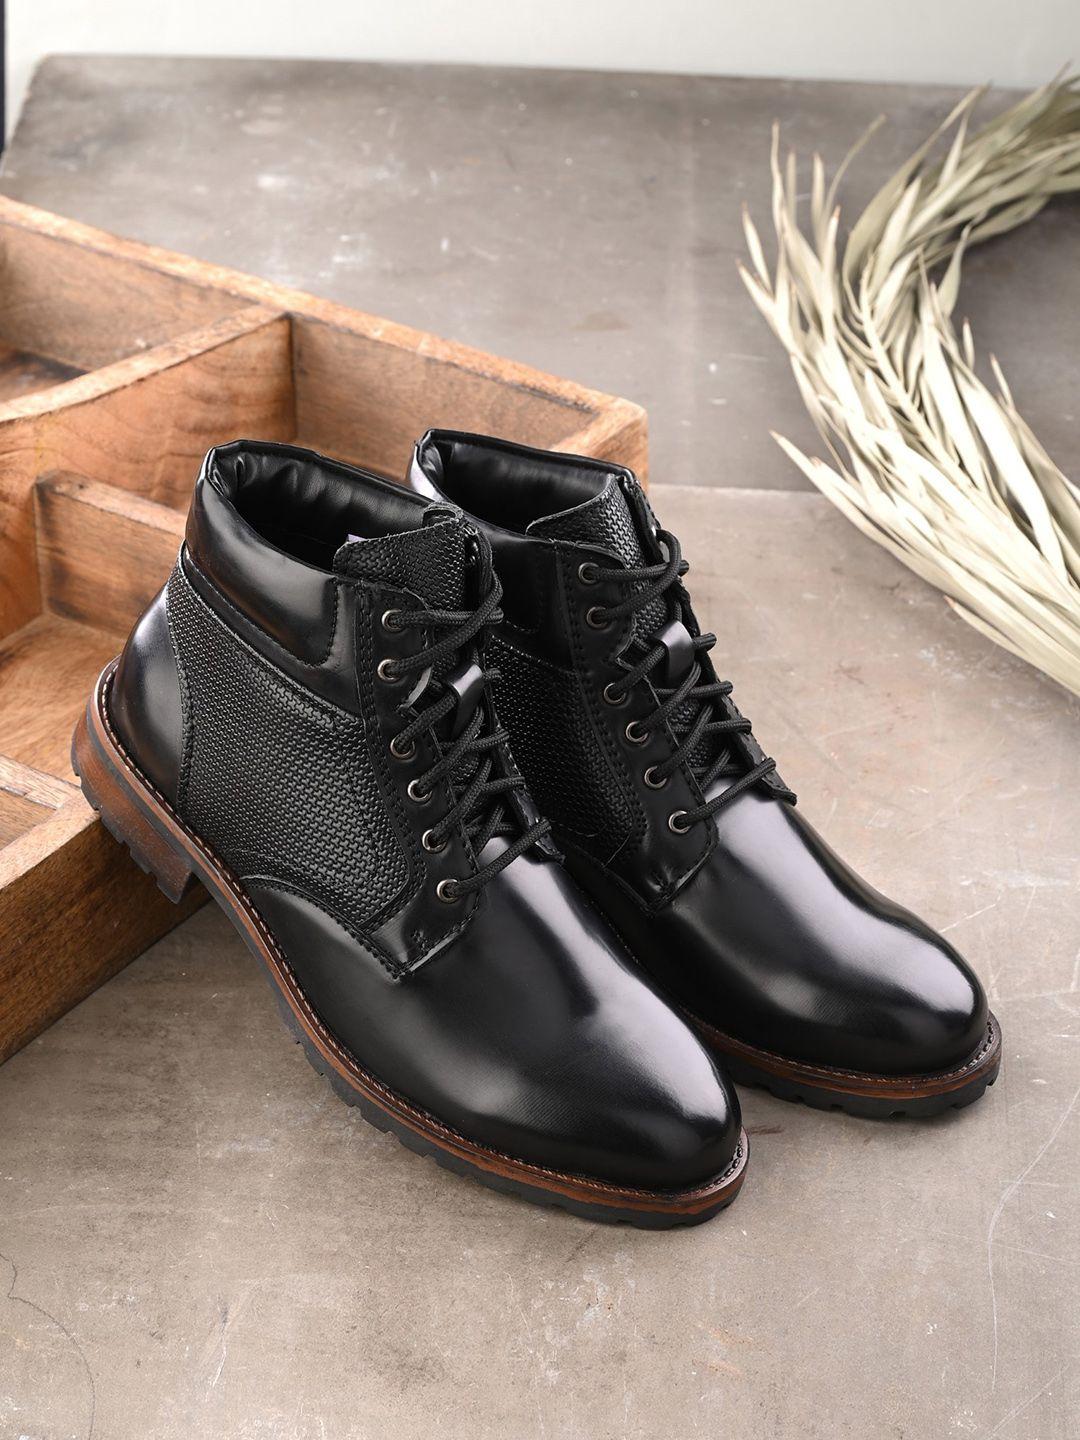 the roadster lifestyle co. men textured high-top regular boots